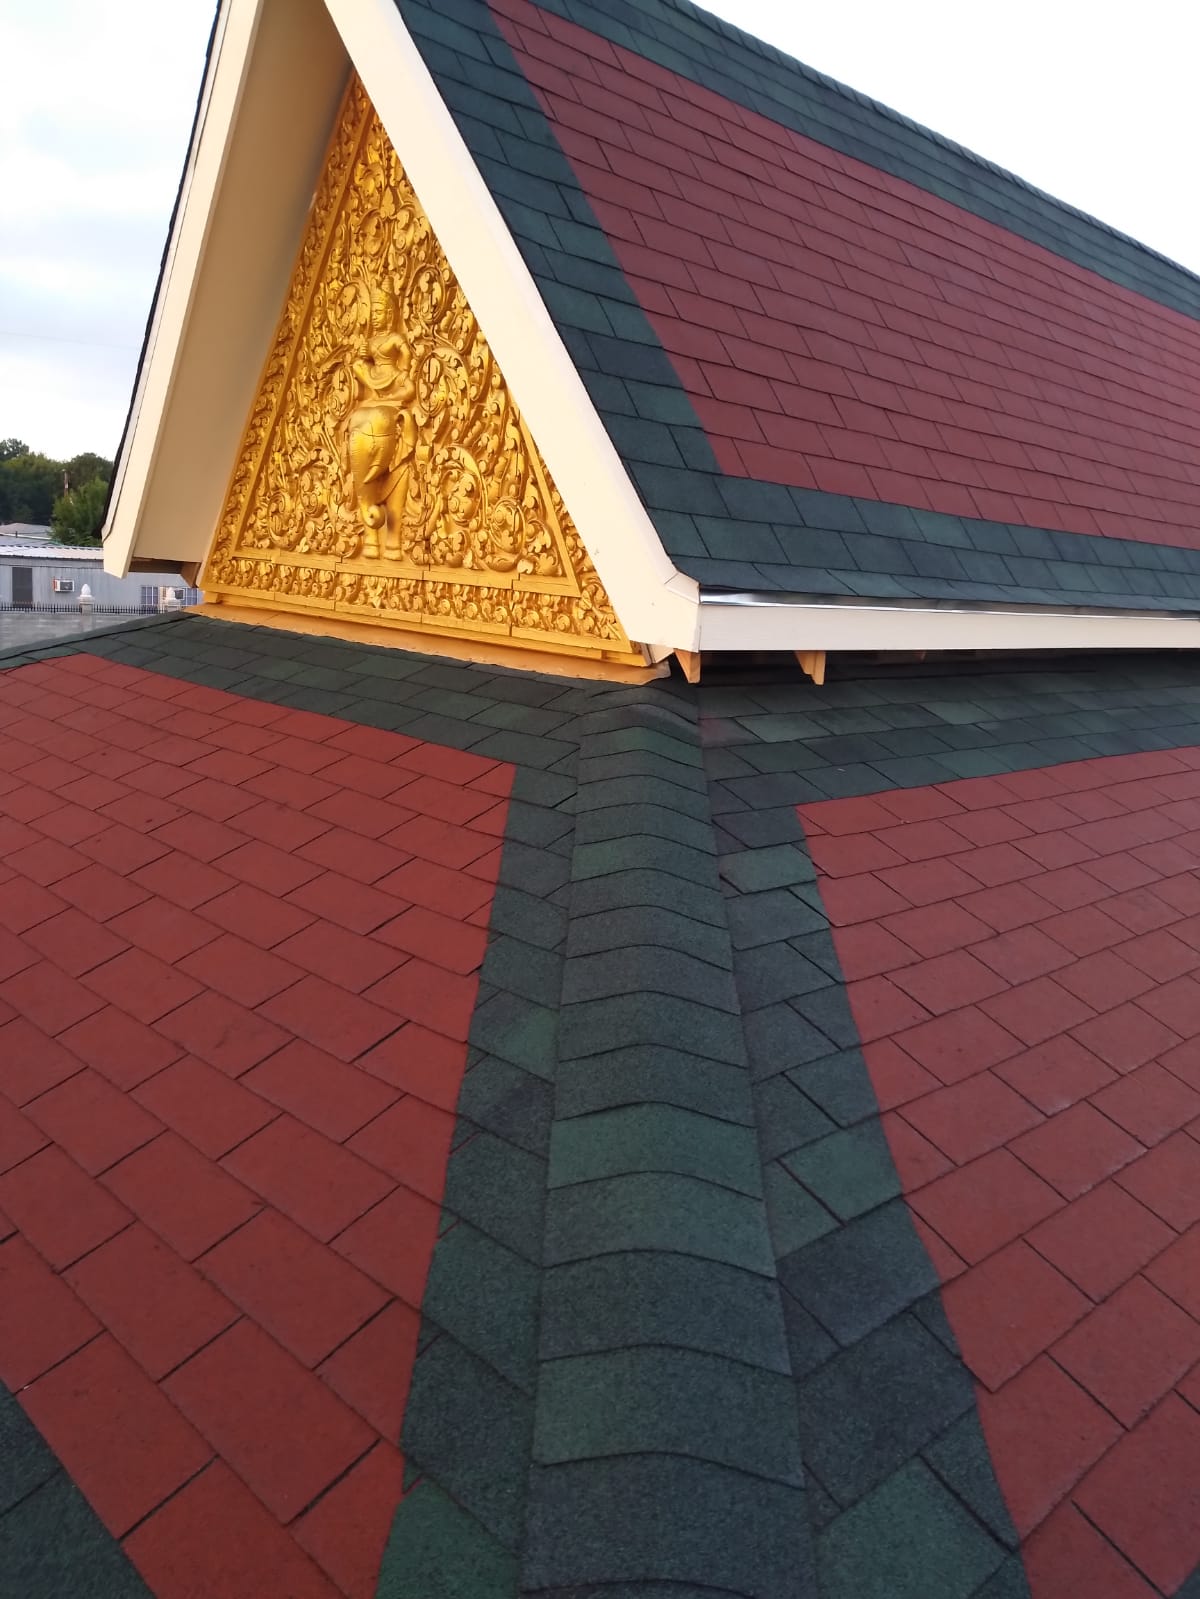 Roof Repairing for a Buddhist Temple in Houston, Texas